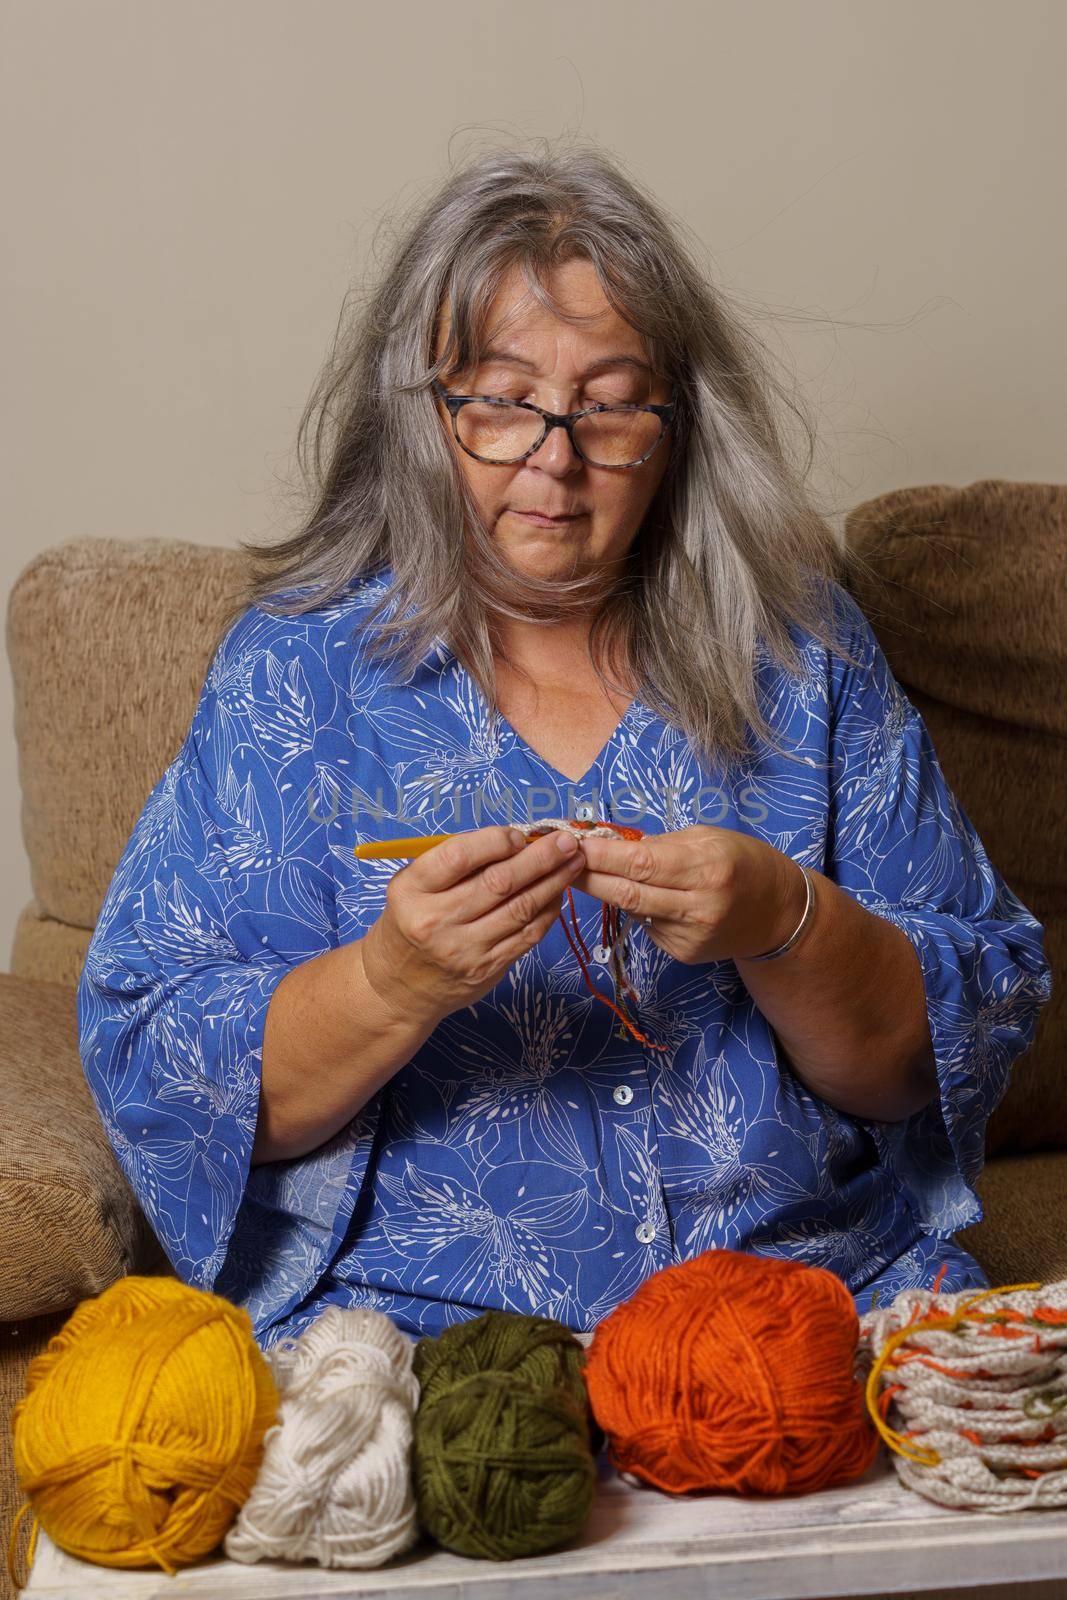 older woman with white hair and glasses crocheting on the sofa at home